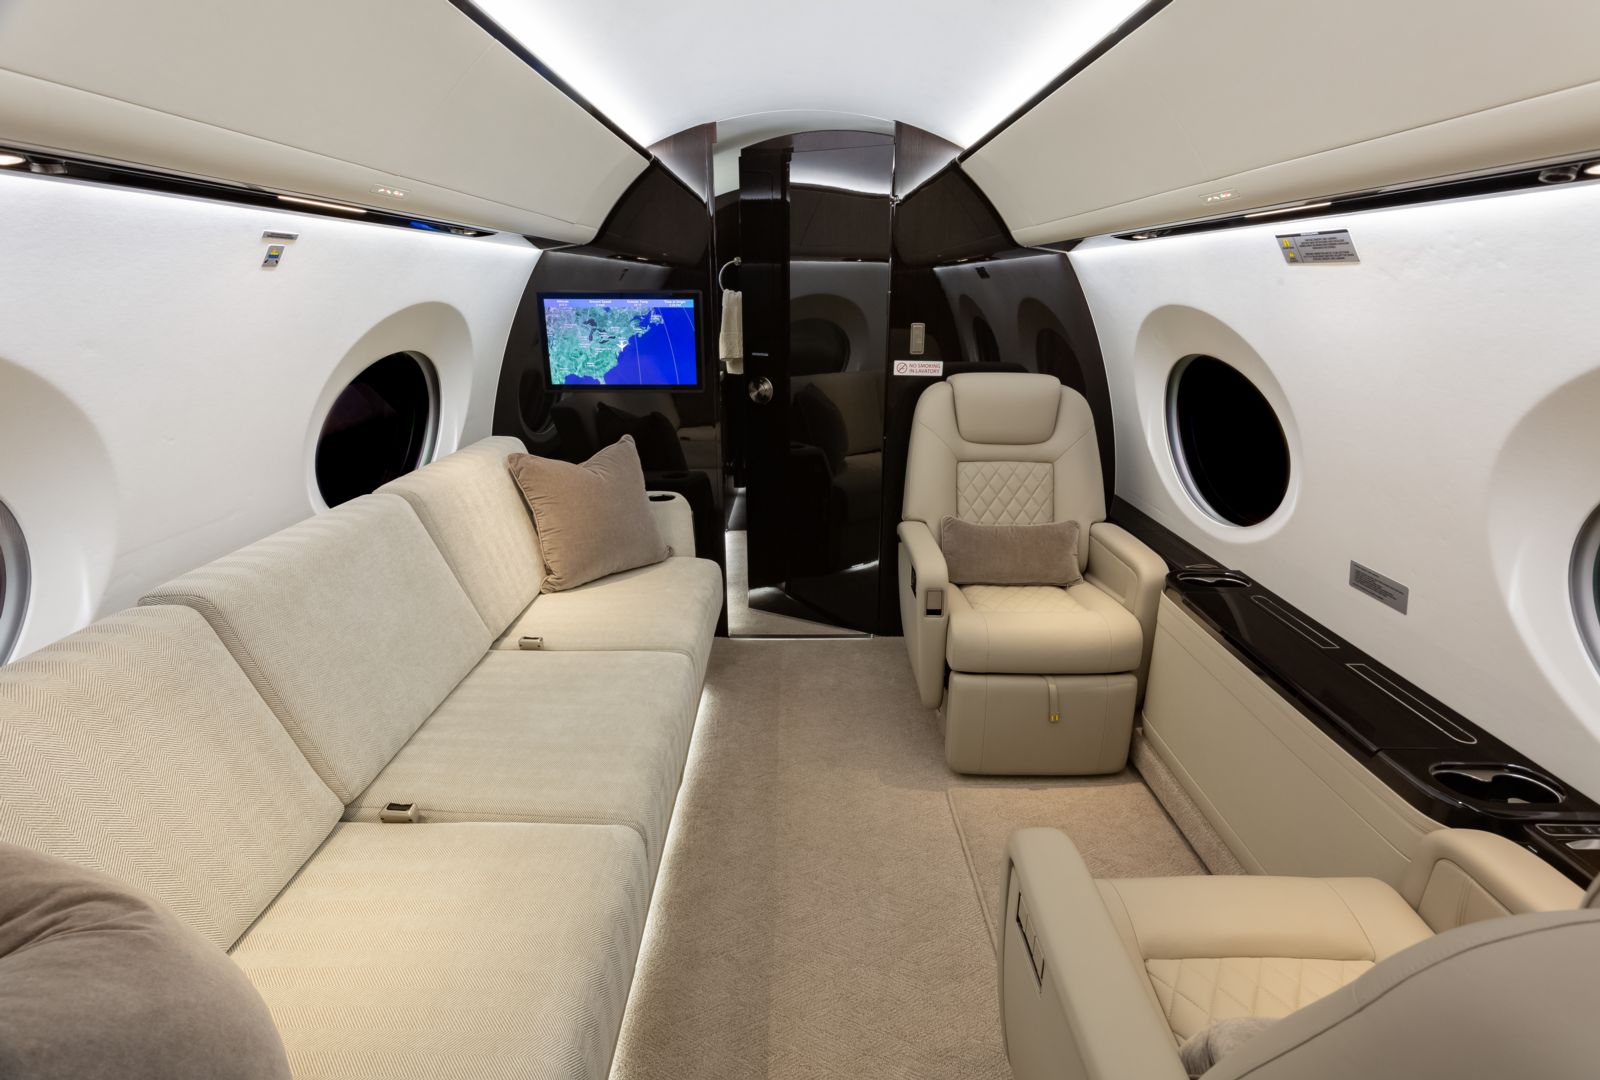 Gulfstream G600  S/N 73053 for sale | gallery image: /userfiles/images/G600_SN_73053/bfp_4006.jpg